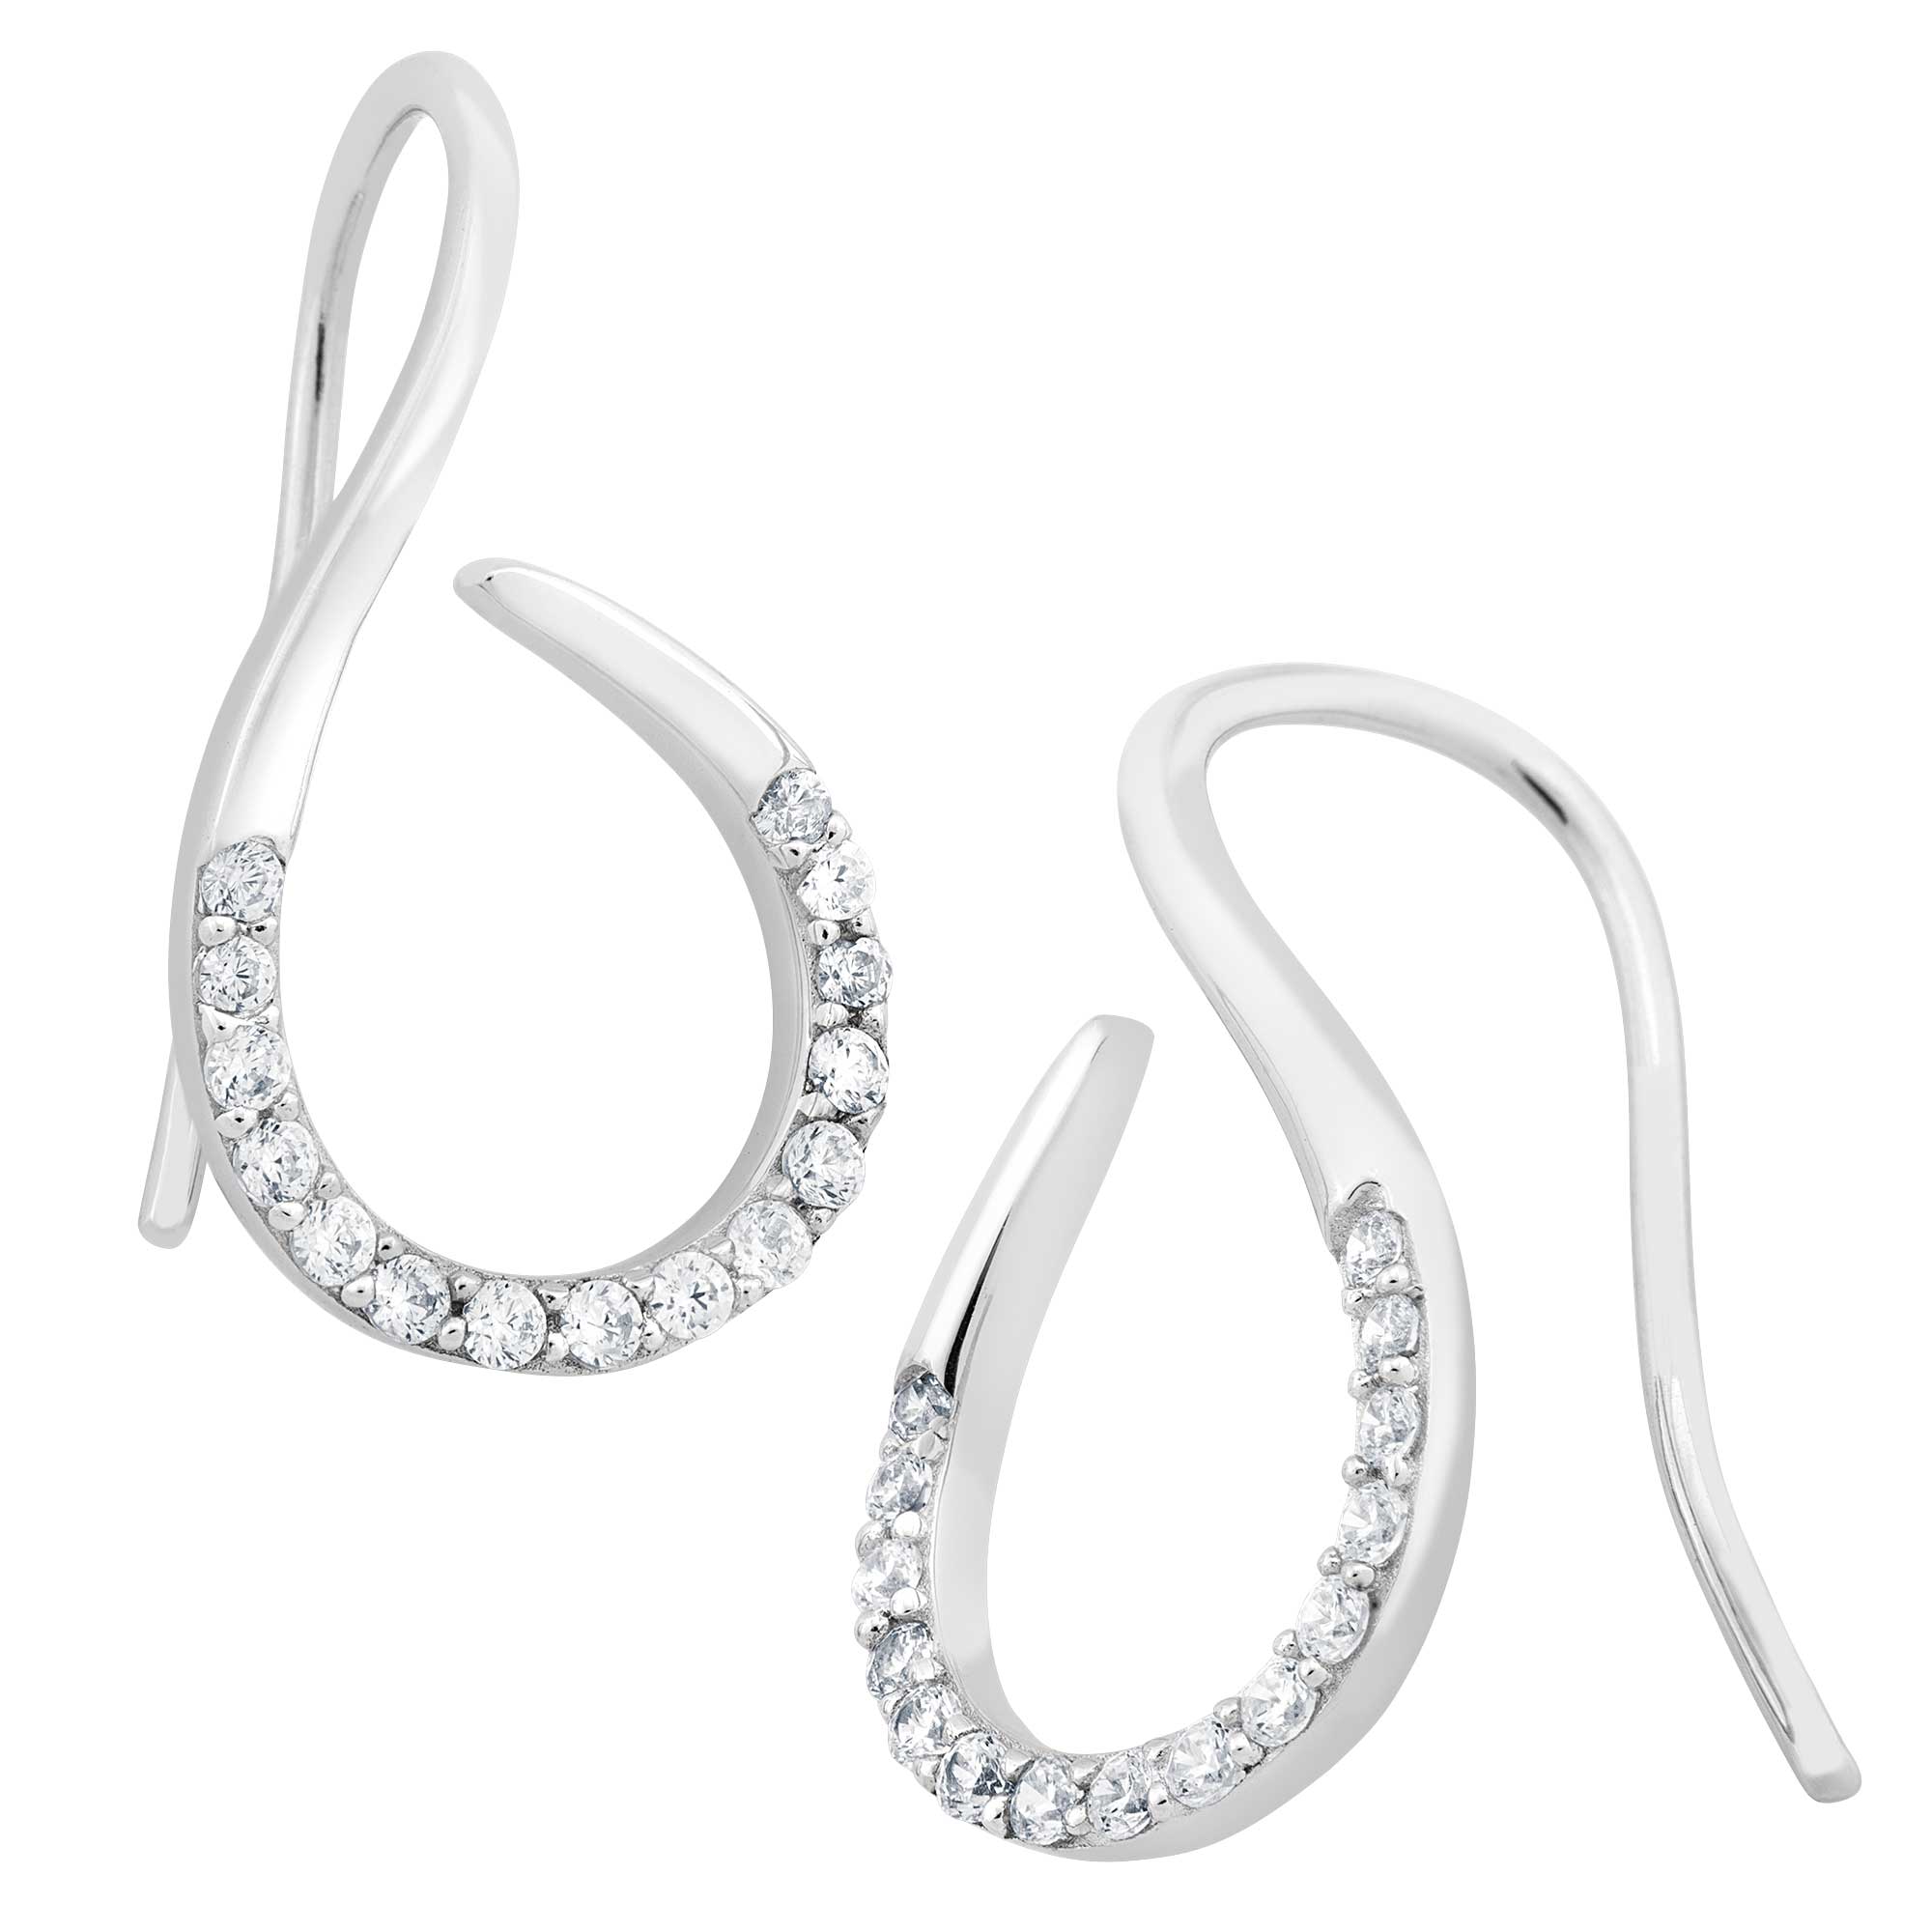 White CZ Earrings, Rhodium Plated Sterling Silver